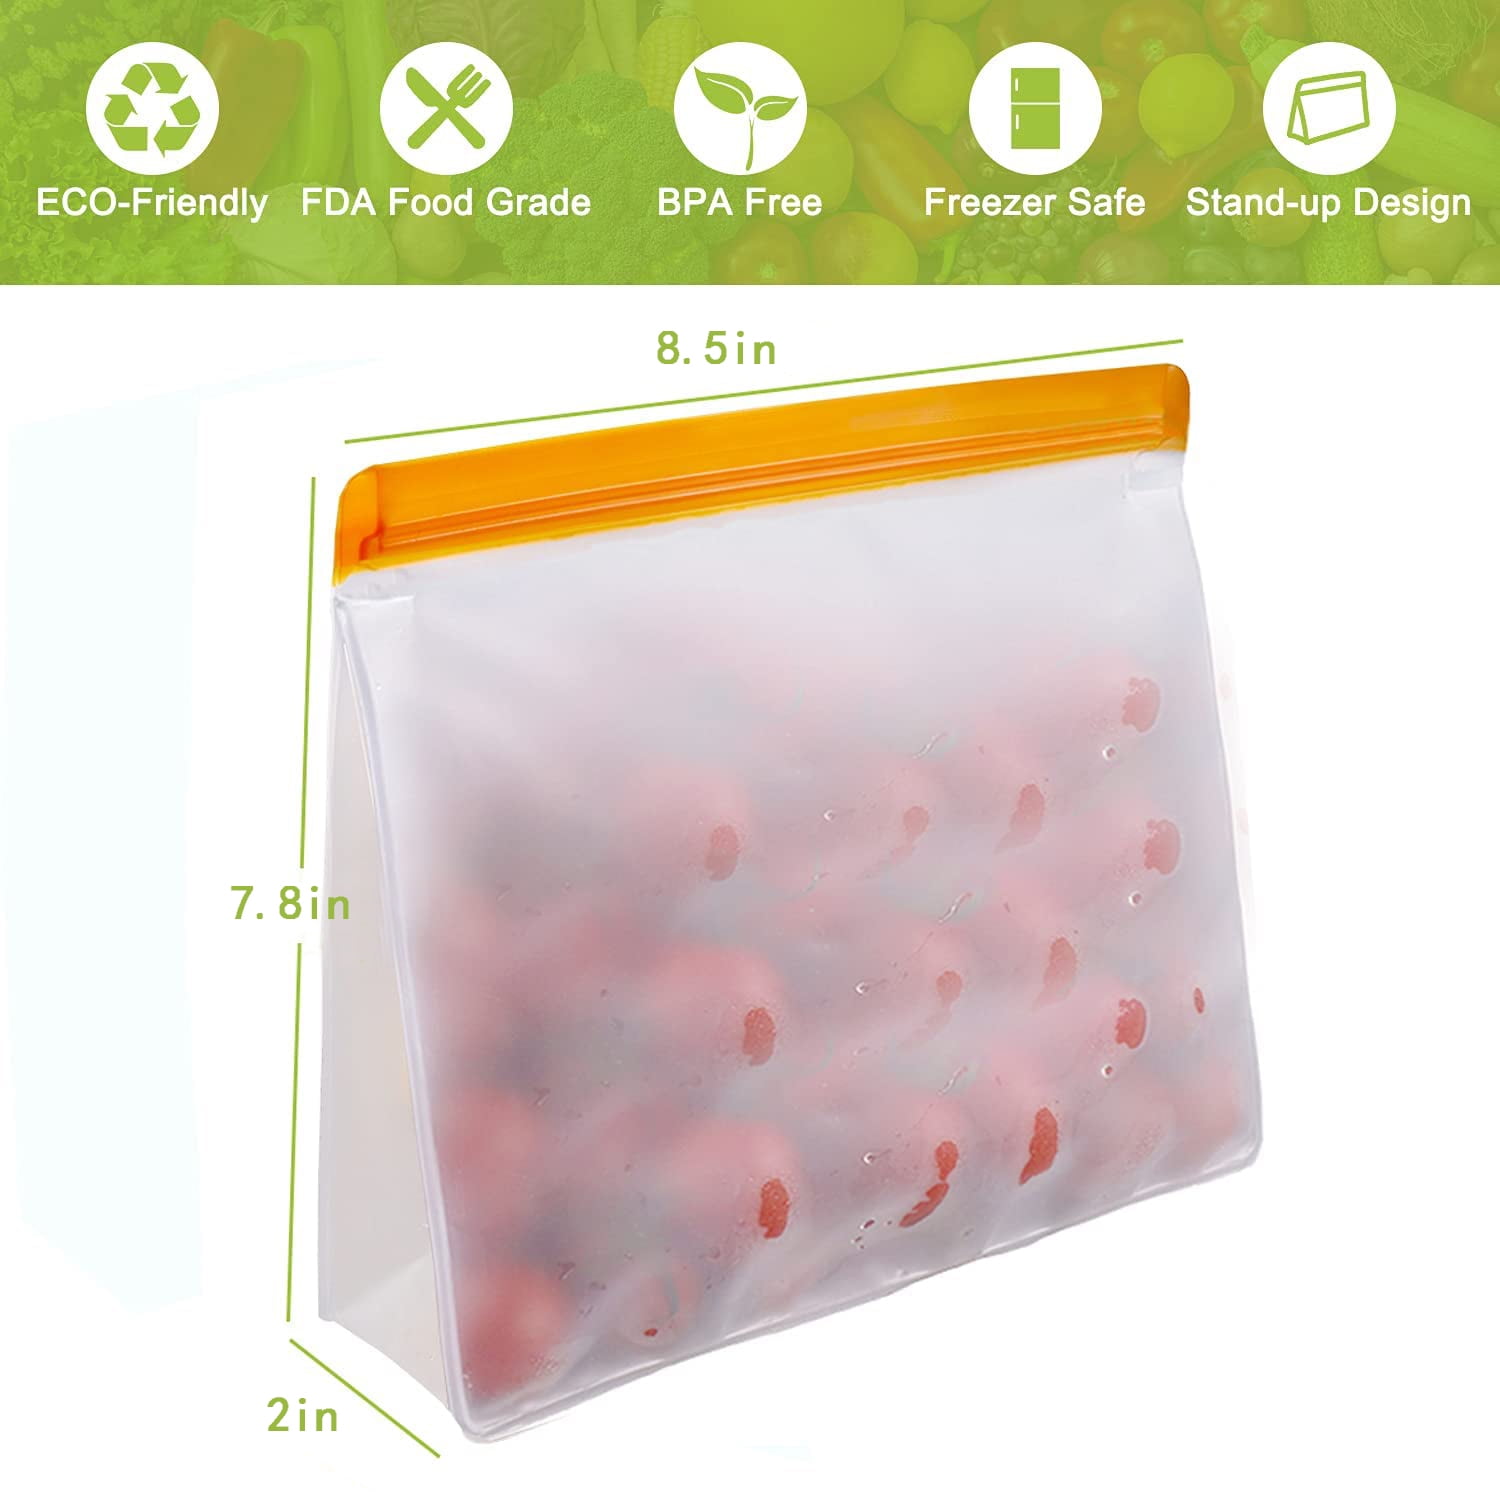 3pcs-silicone ziplock bags,Reusable Food Storage Bags , BPA FREE Freezer  Bags( Reusable Gallon Bags + Reusable Sandwich Bags + Food Grade Snack Bags)  EXTRA THICK Leakproof Reusbale Lunch Bag for Salad Fruit